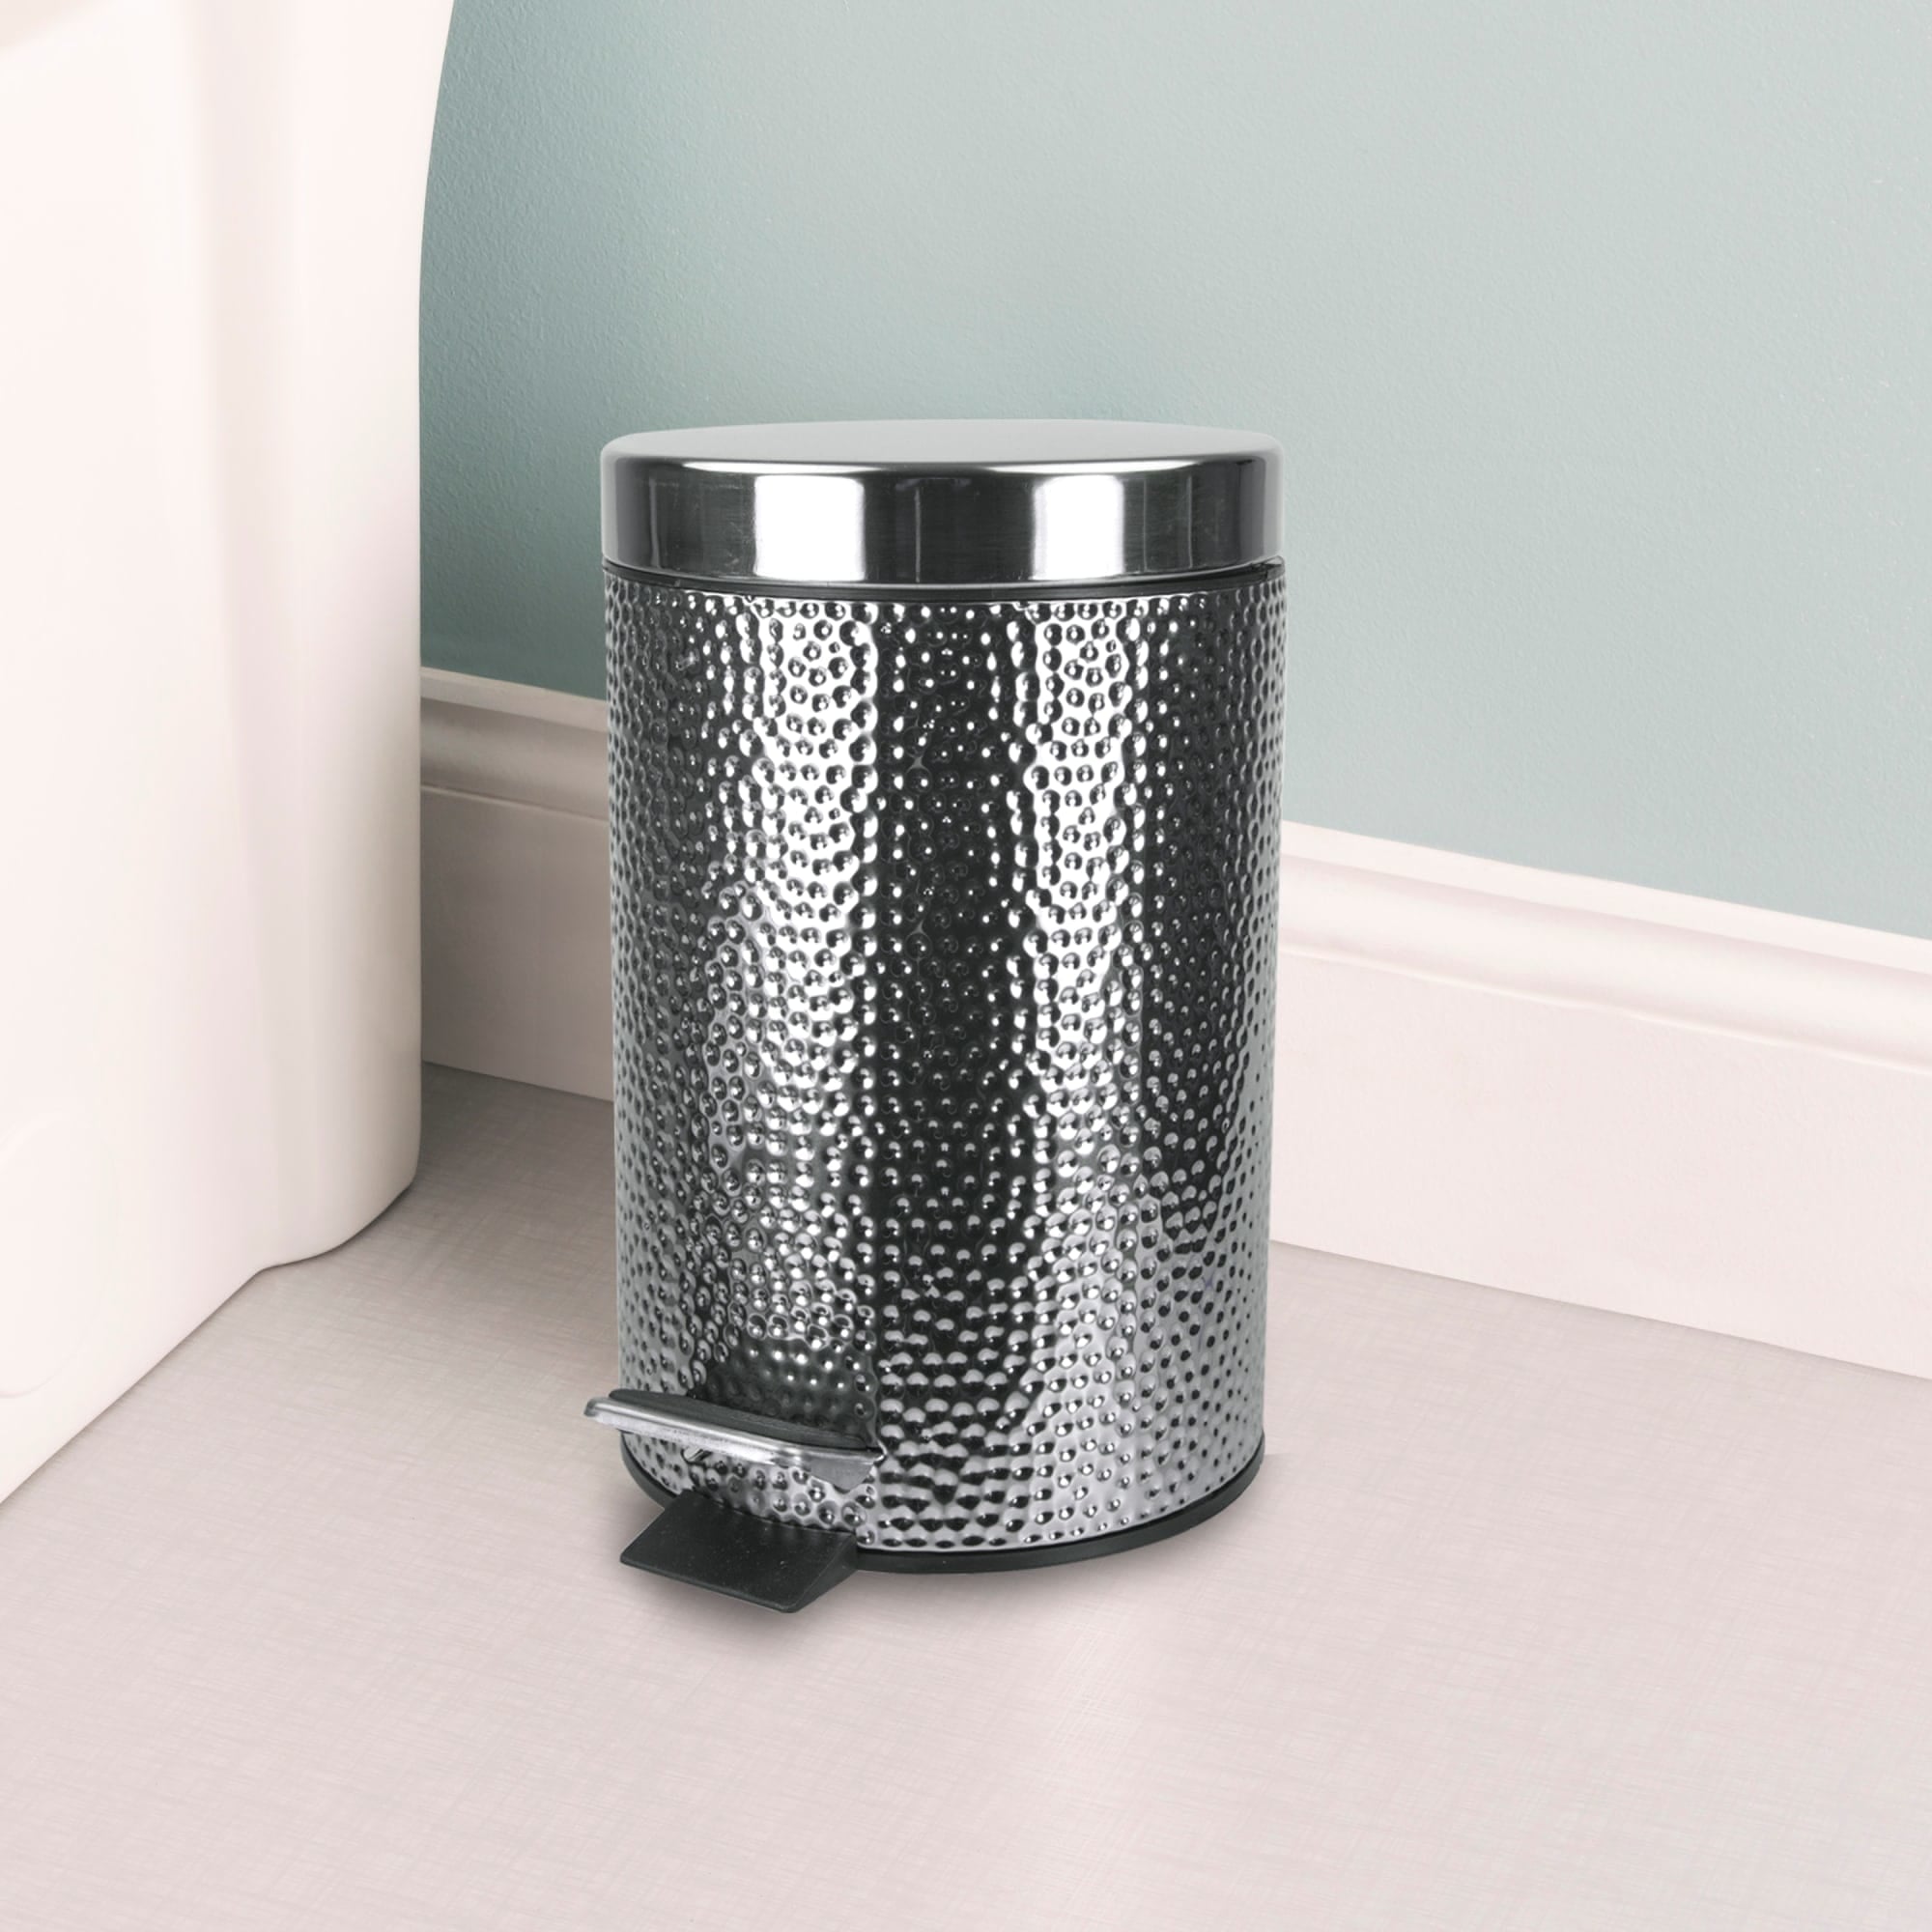 Home Basics Hammered Stainless Steel Waste Bin $8.00 EACH, CASE PACK OF 6